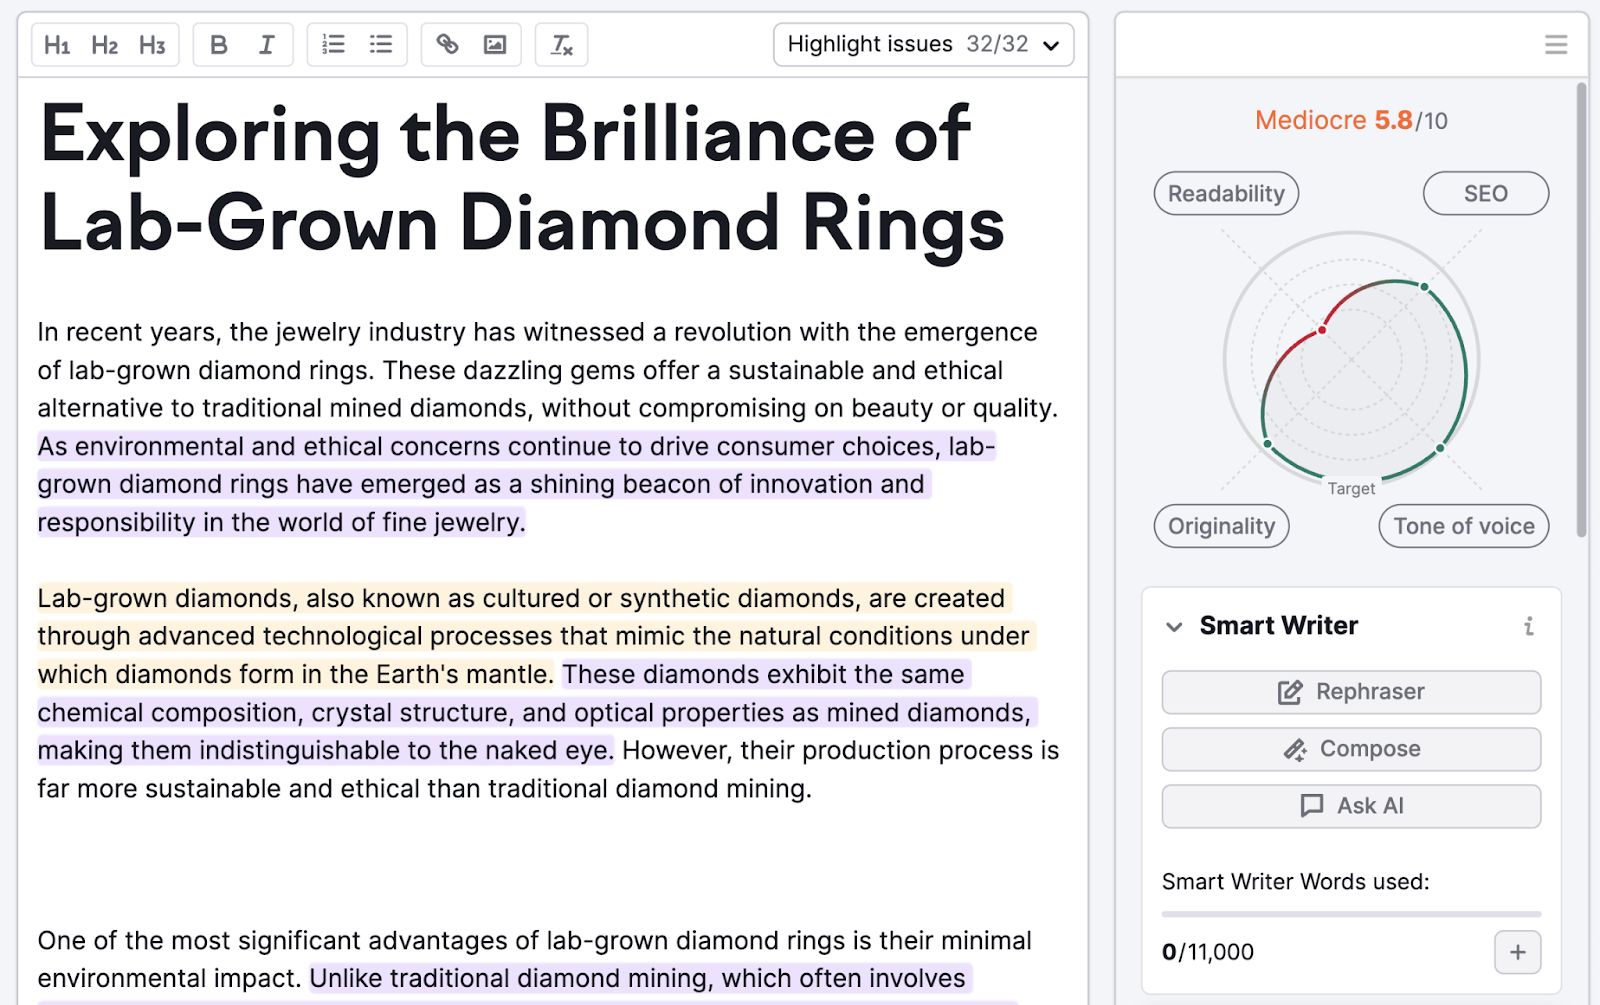 An article about diamond rings in the SEO Writing Assistant. On the right, there is a radar chart and a section called "Smart Writer."